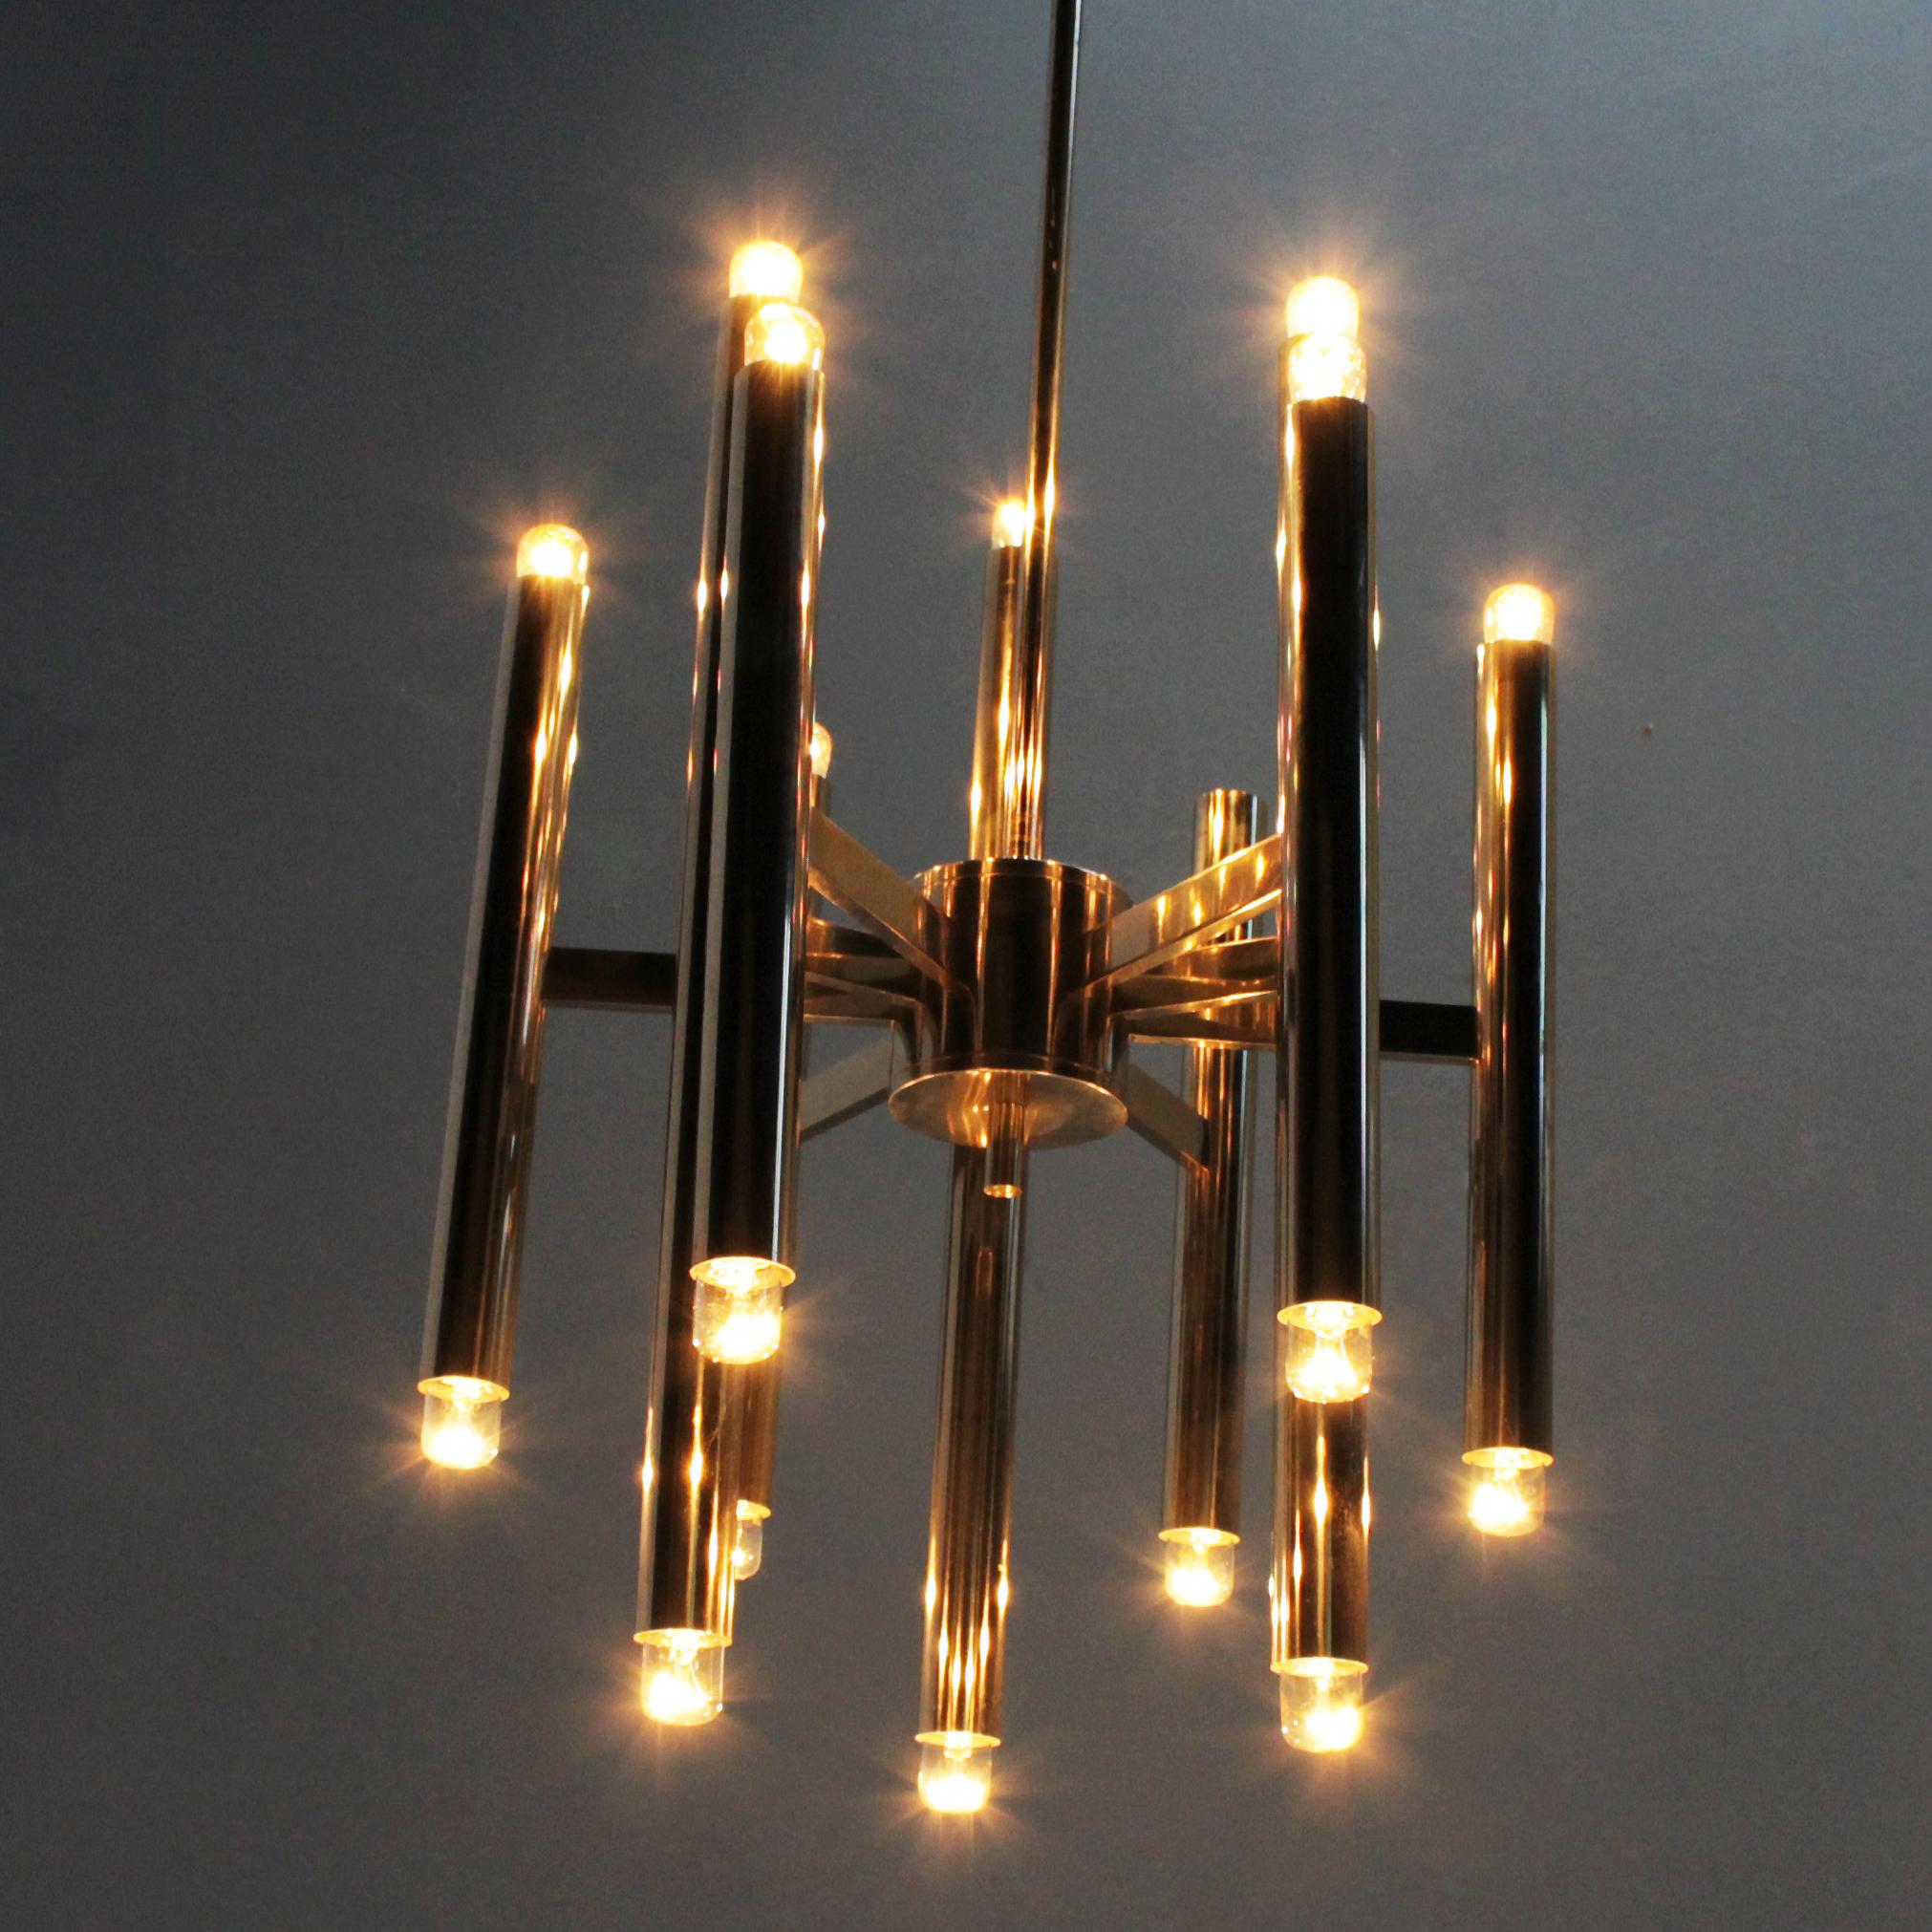 Chrome nine-arm tubular chandelier by Gaetano Sciolari with eighteen (18) lights. Lights on the top and the bottom. Small Edison screw (SES), (E17 14-17 mm) max 40 watt, the electricity is used but in a good condition, approved to European